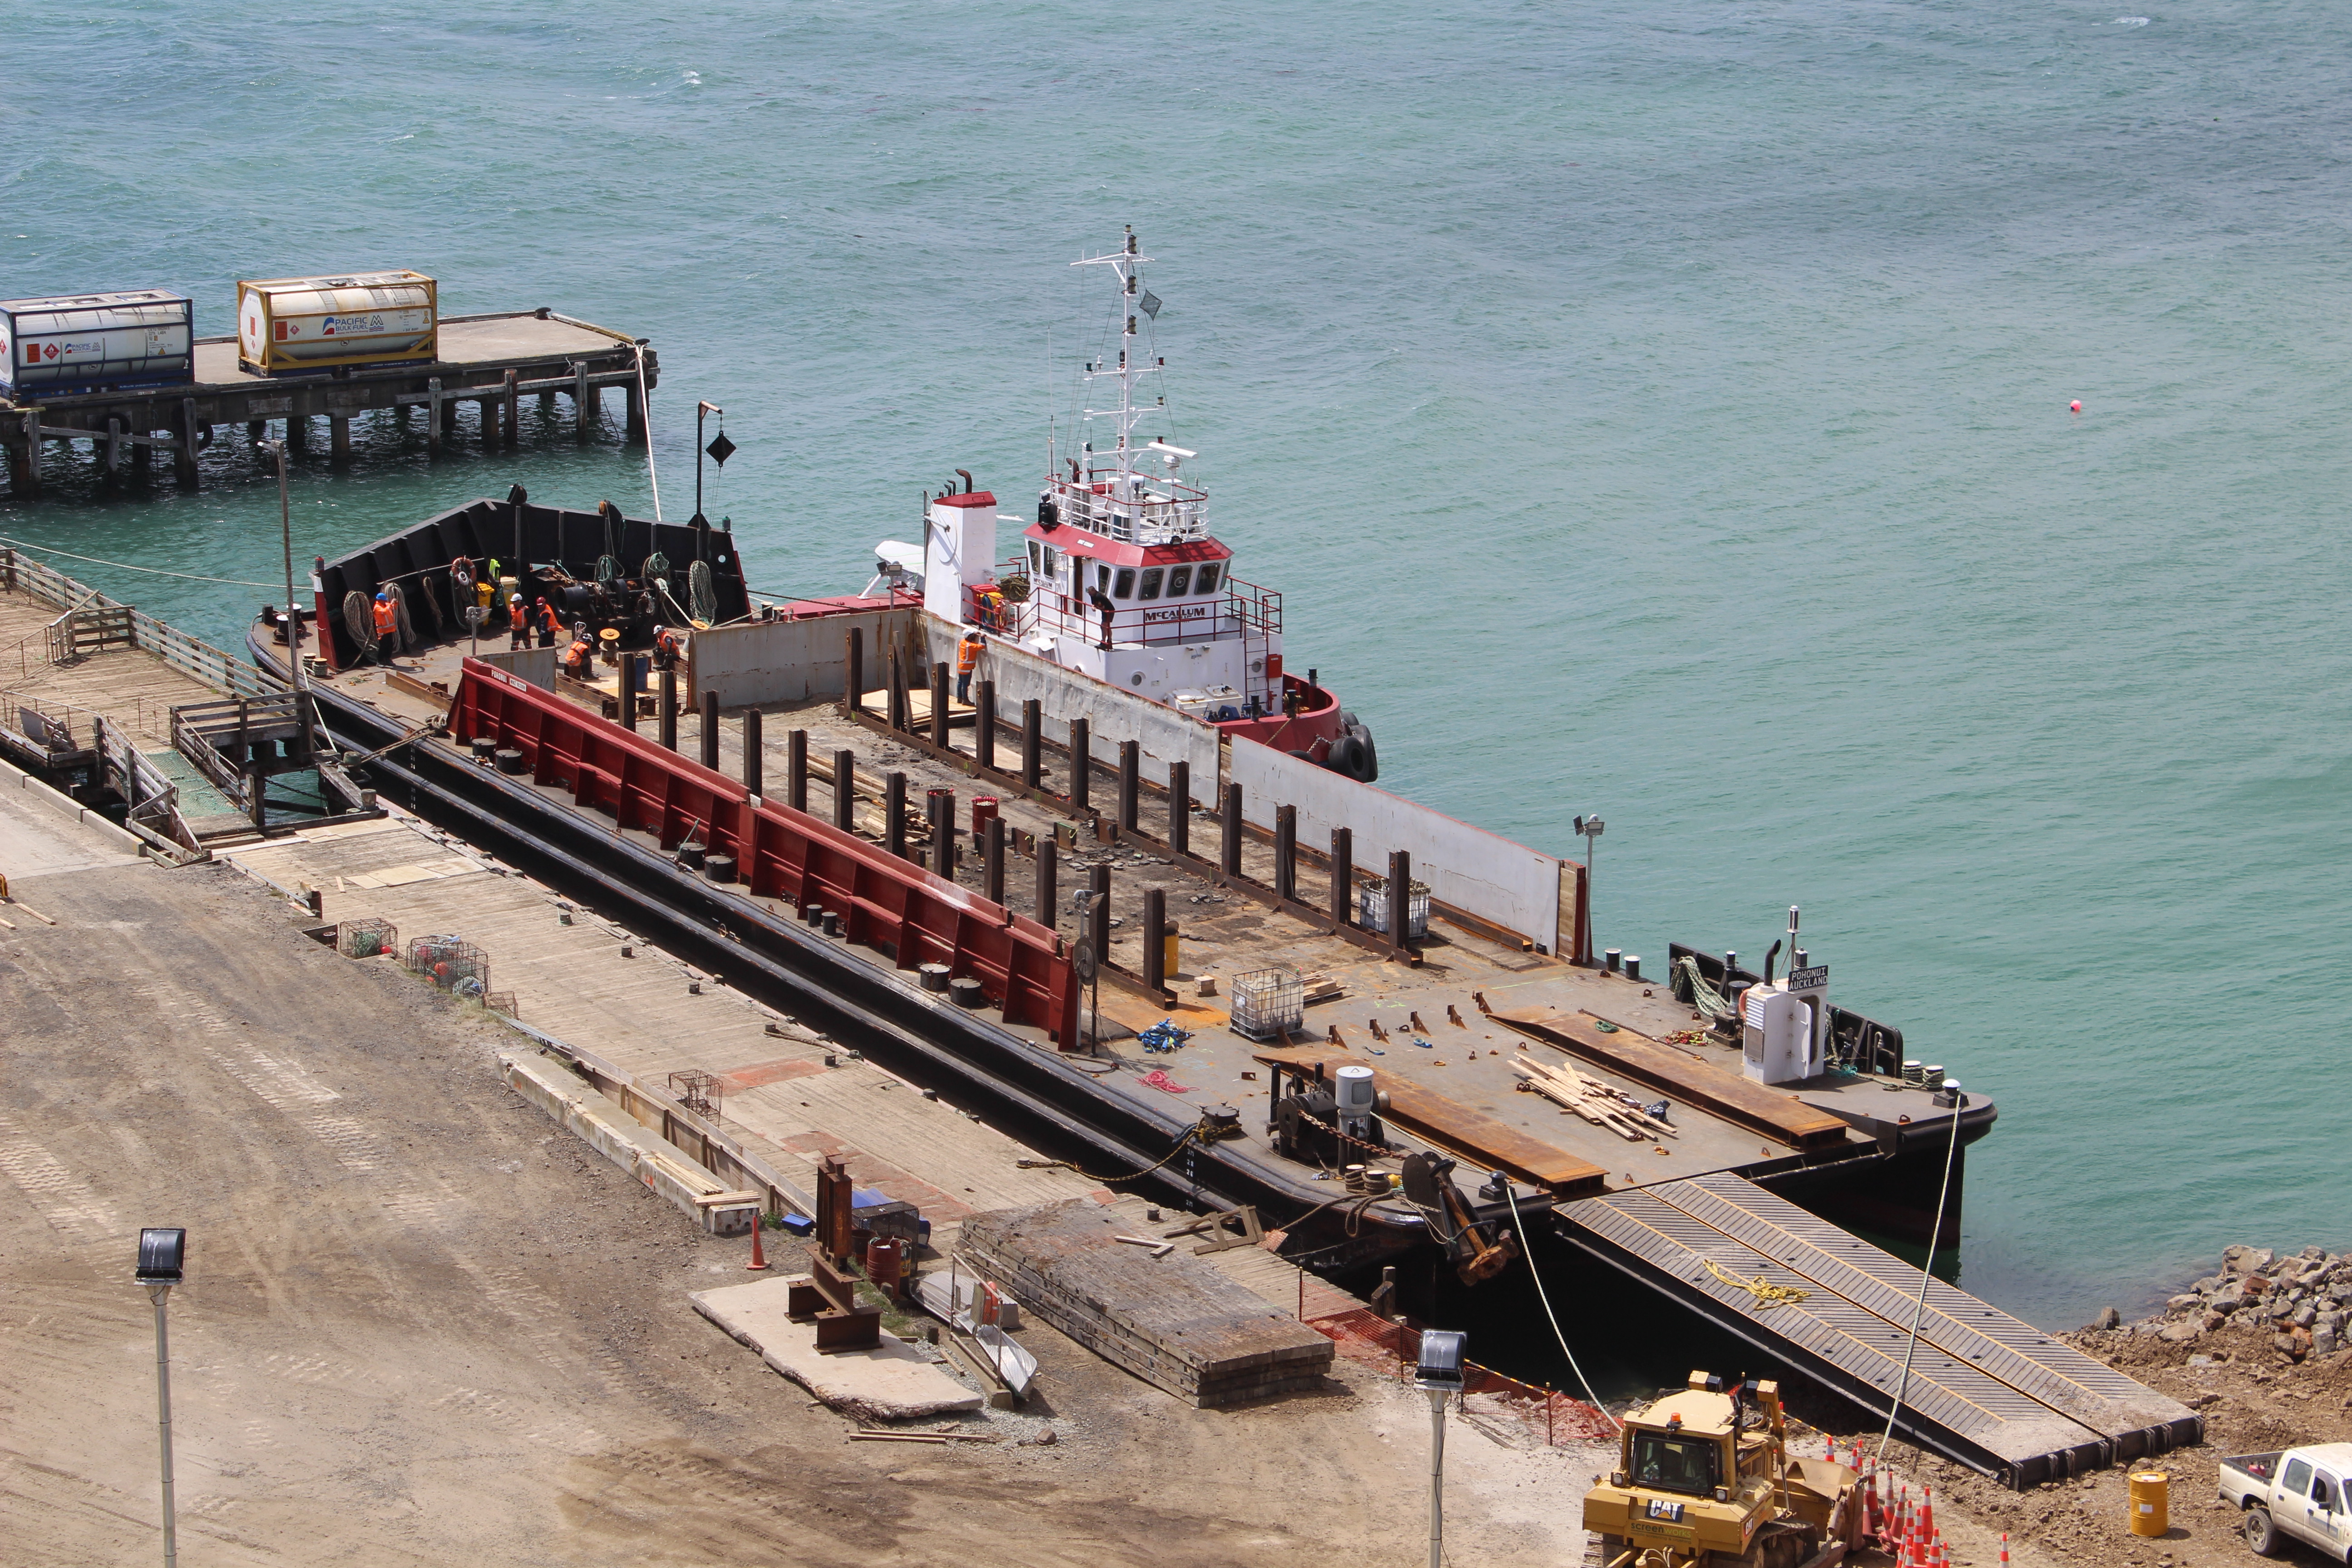 Large barge tied up at a wharf in the Chatham Islands where Pohunui worked on a previous job.